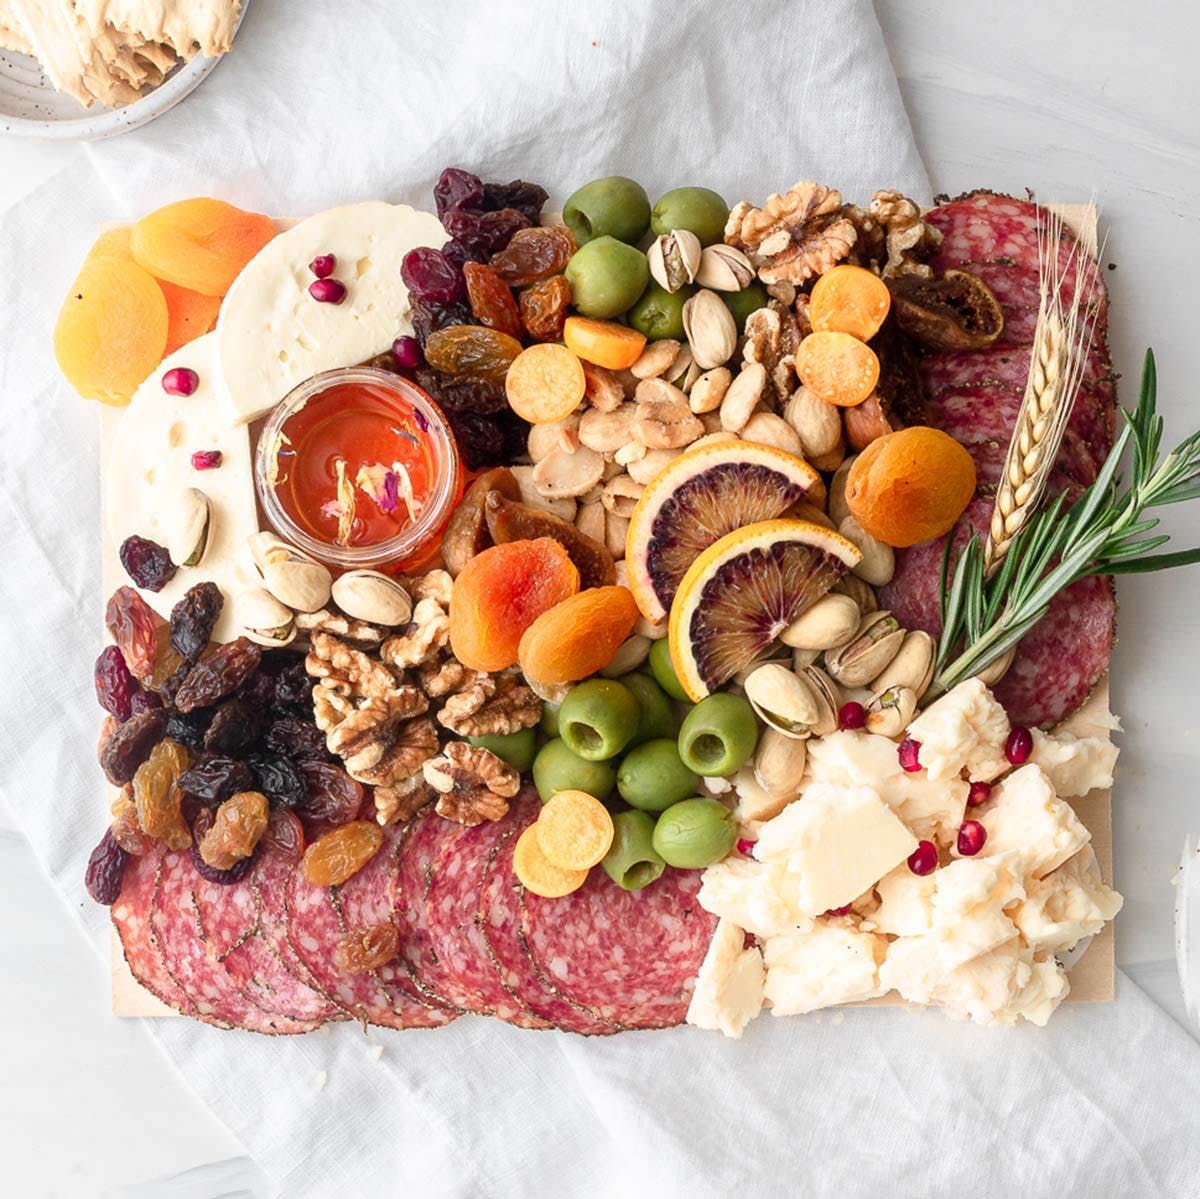 Cheese & Charcuterie Board Kit for 4-6 | Goldbelly